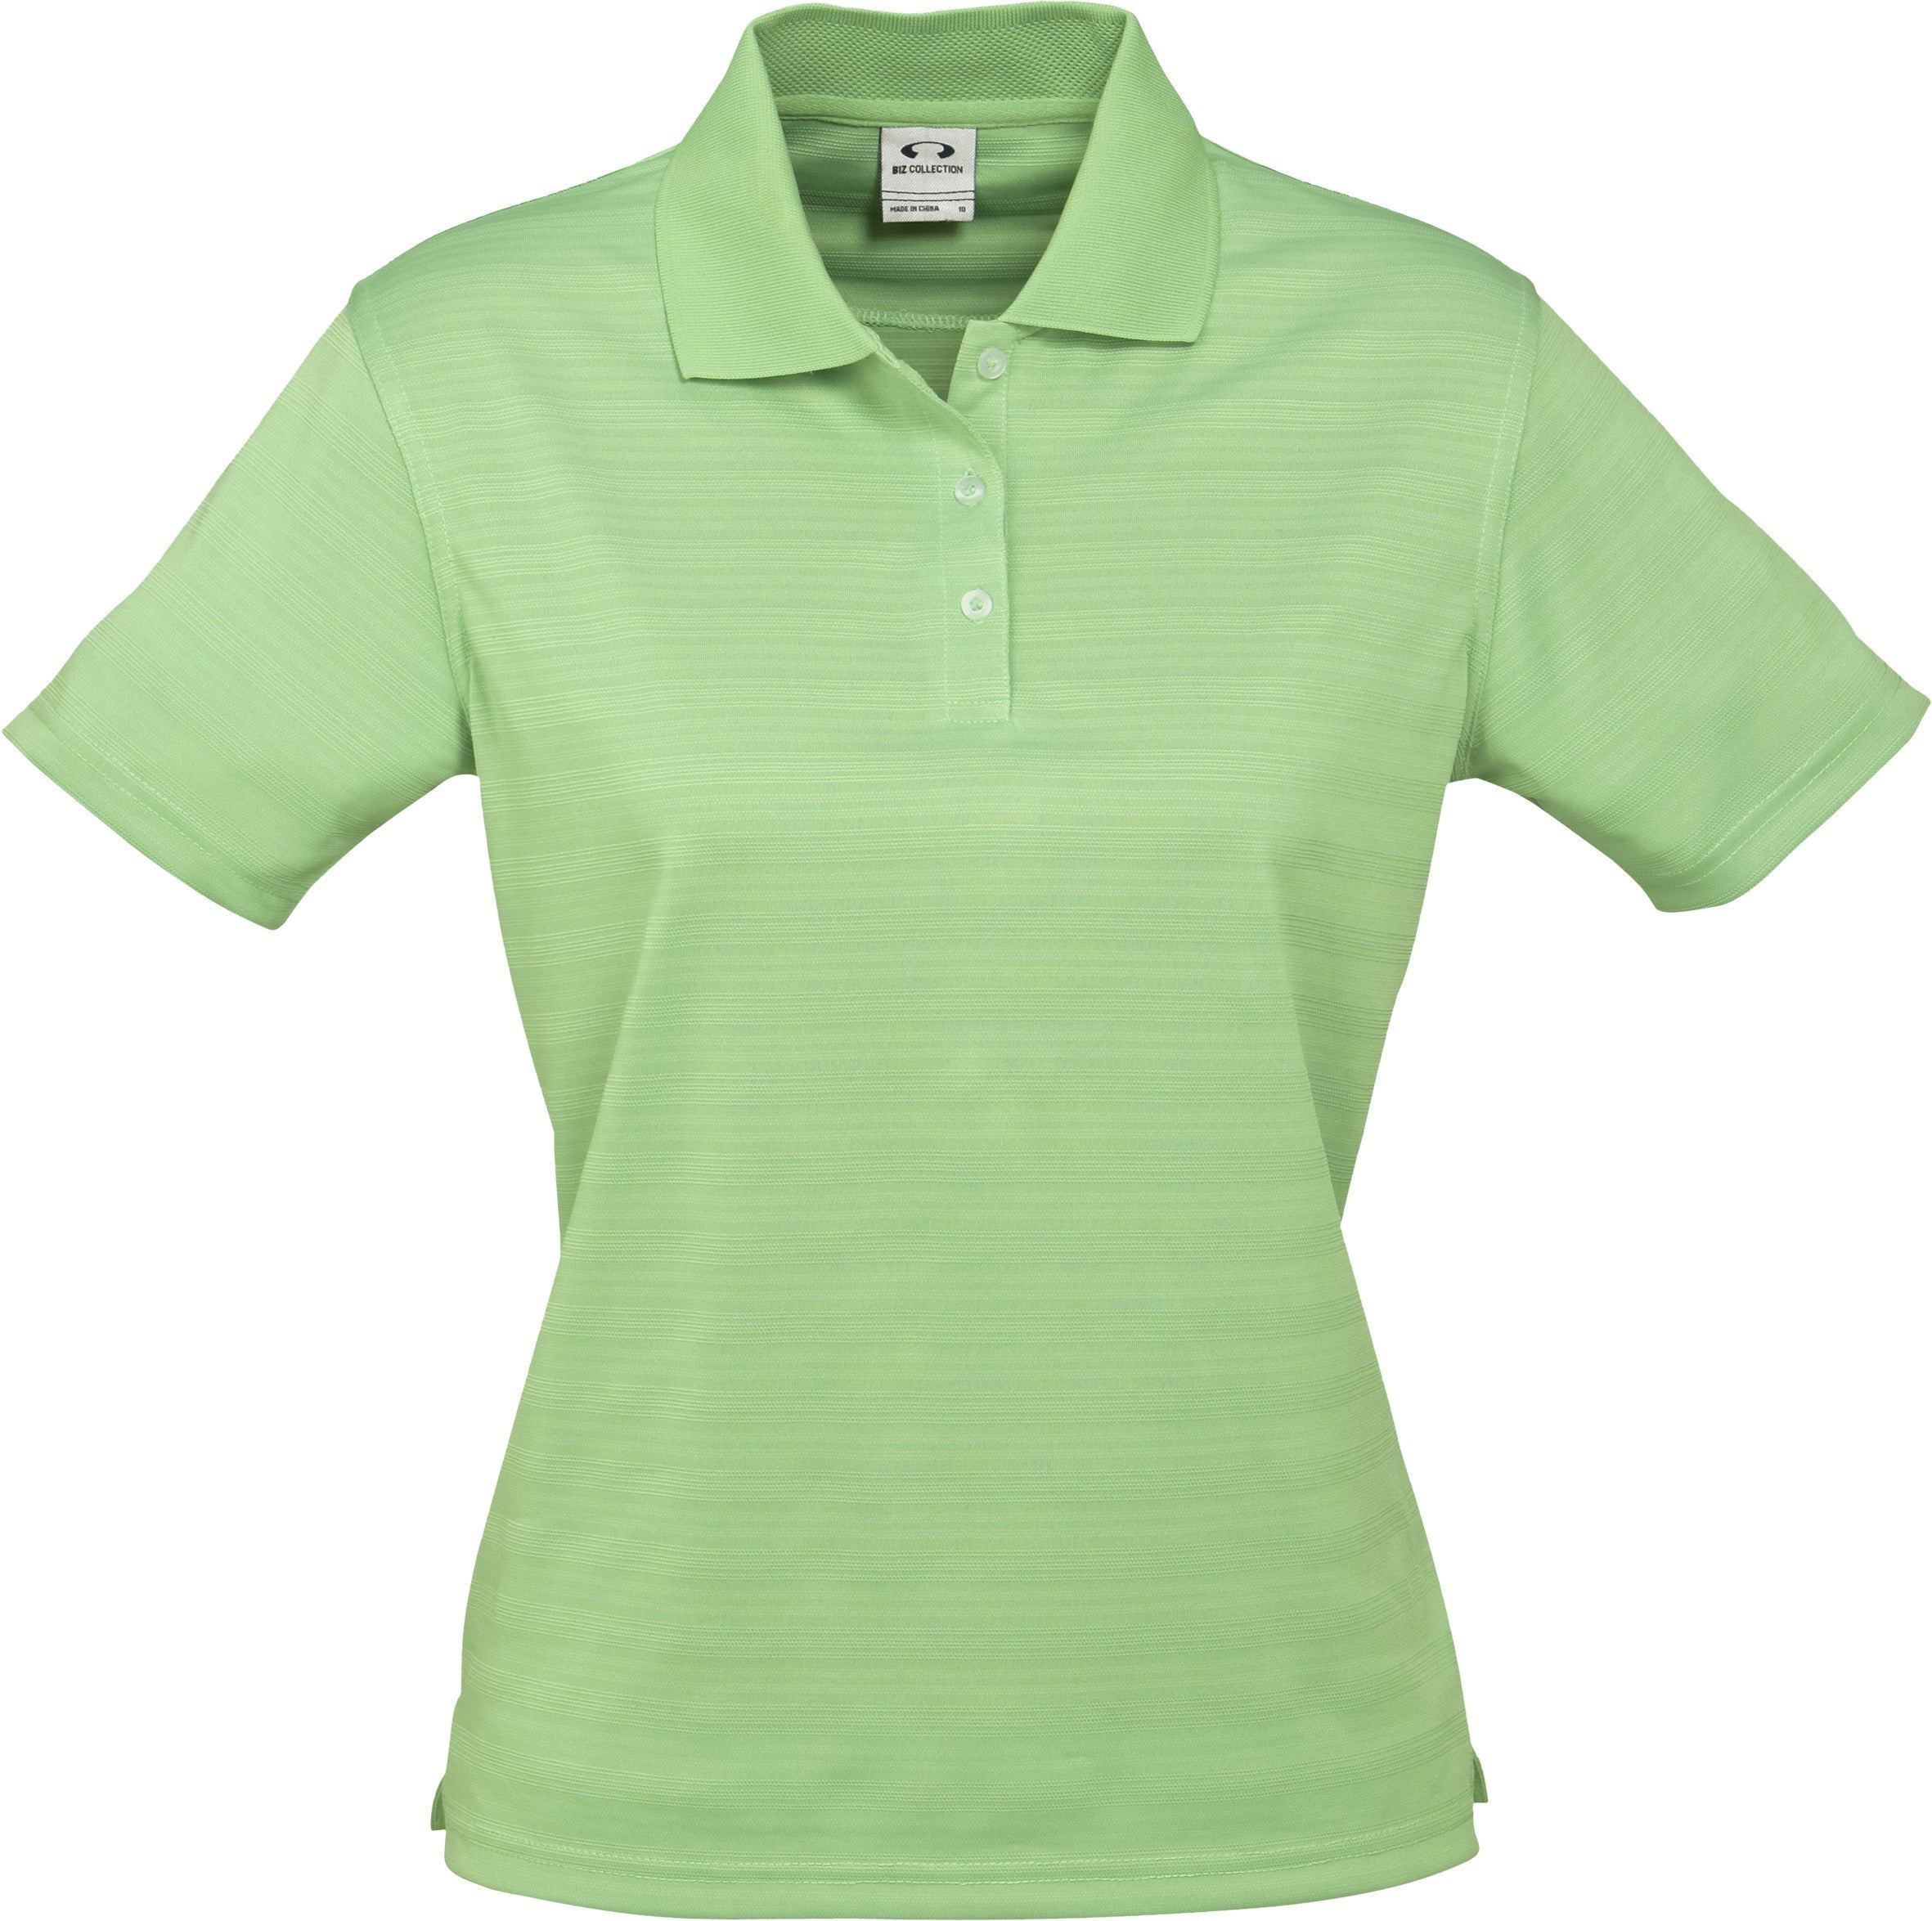 Ladies Icon Golf Shirt - Lime Only-L-Lime-L